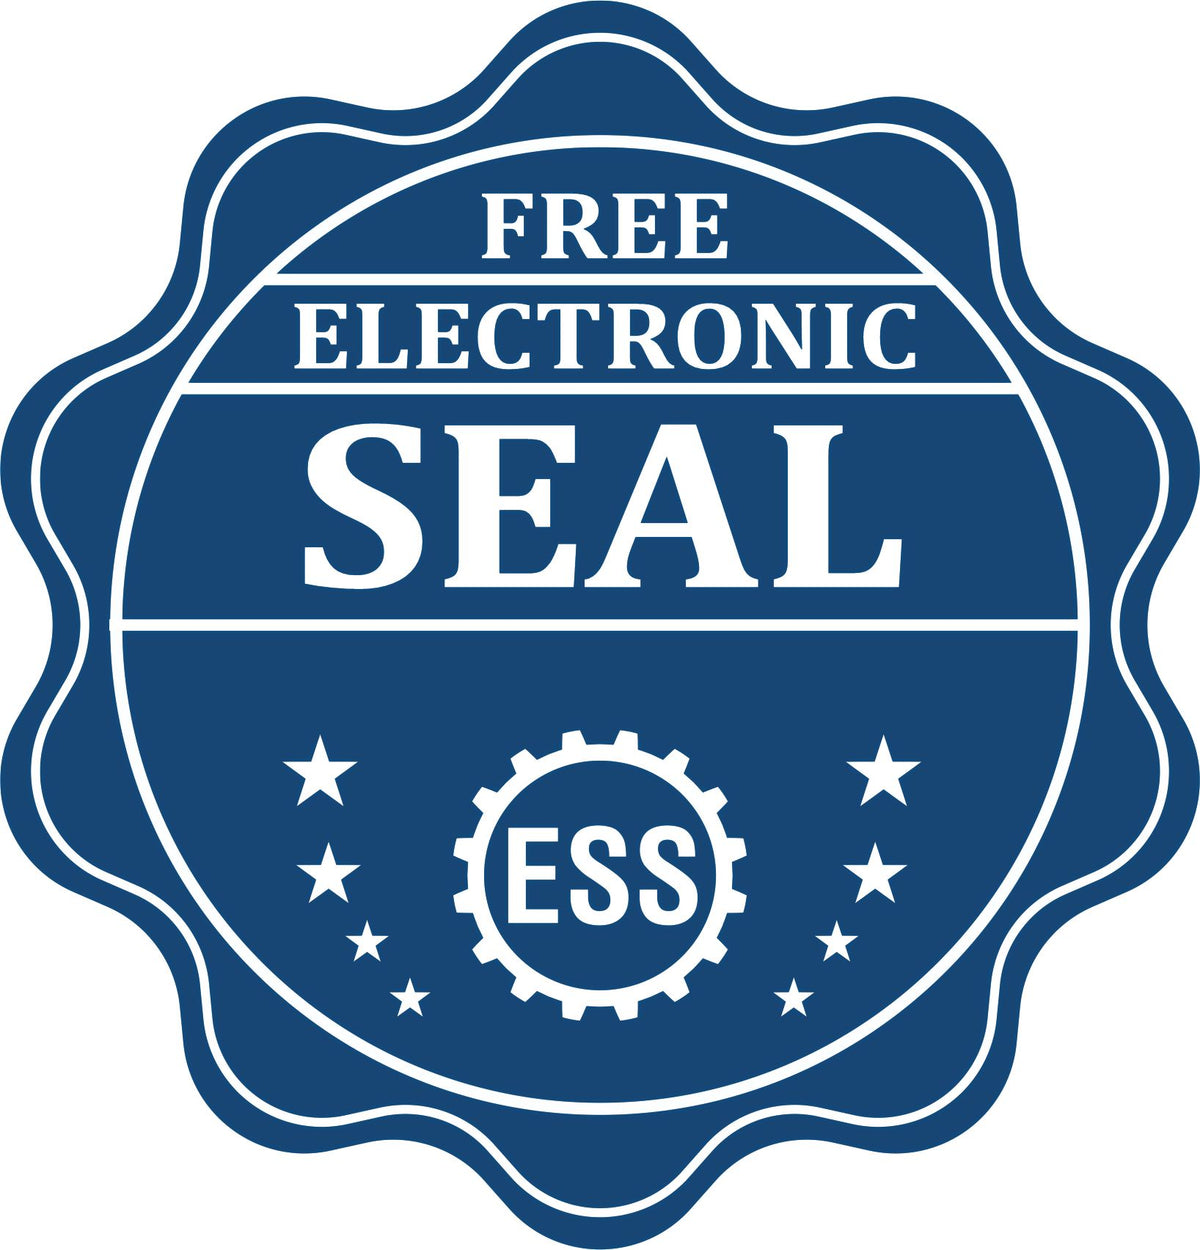 A badge showing a free electronic seal for the Nebraska Professional Engineer Seal Stamp with stars and the ESS gear on the emblem.